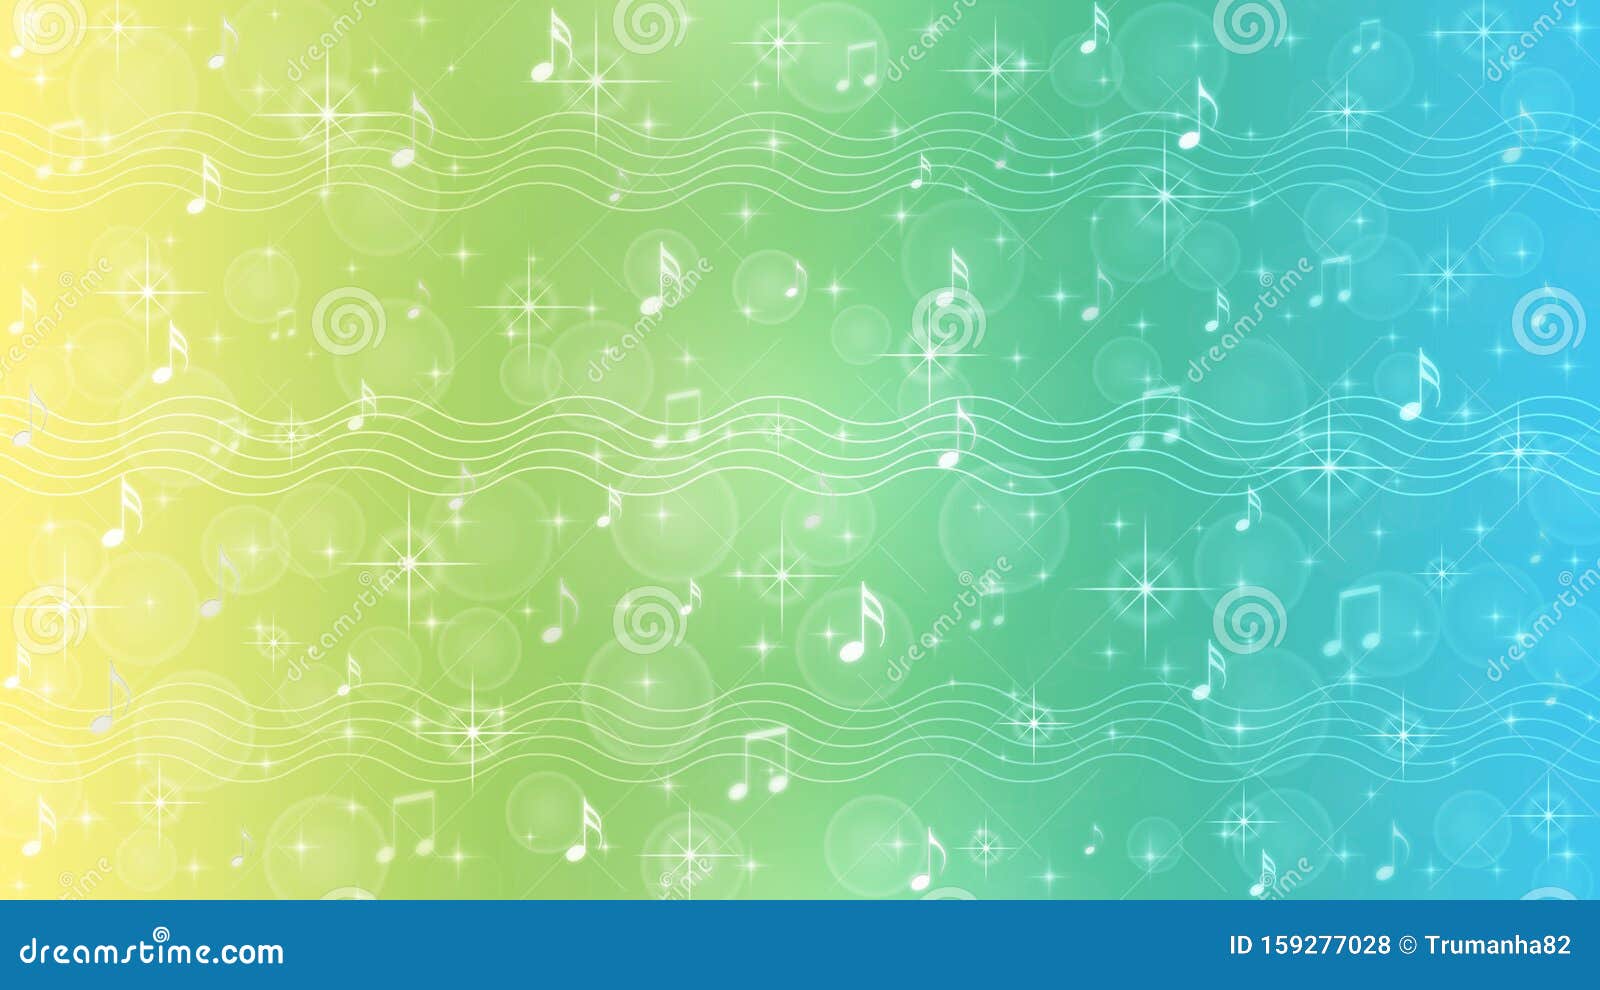 abstract music notes and staves in pastel blue, green and yellow gradient background